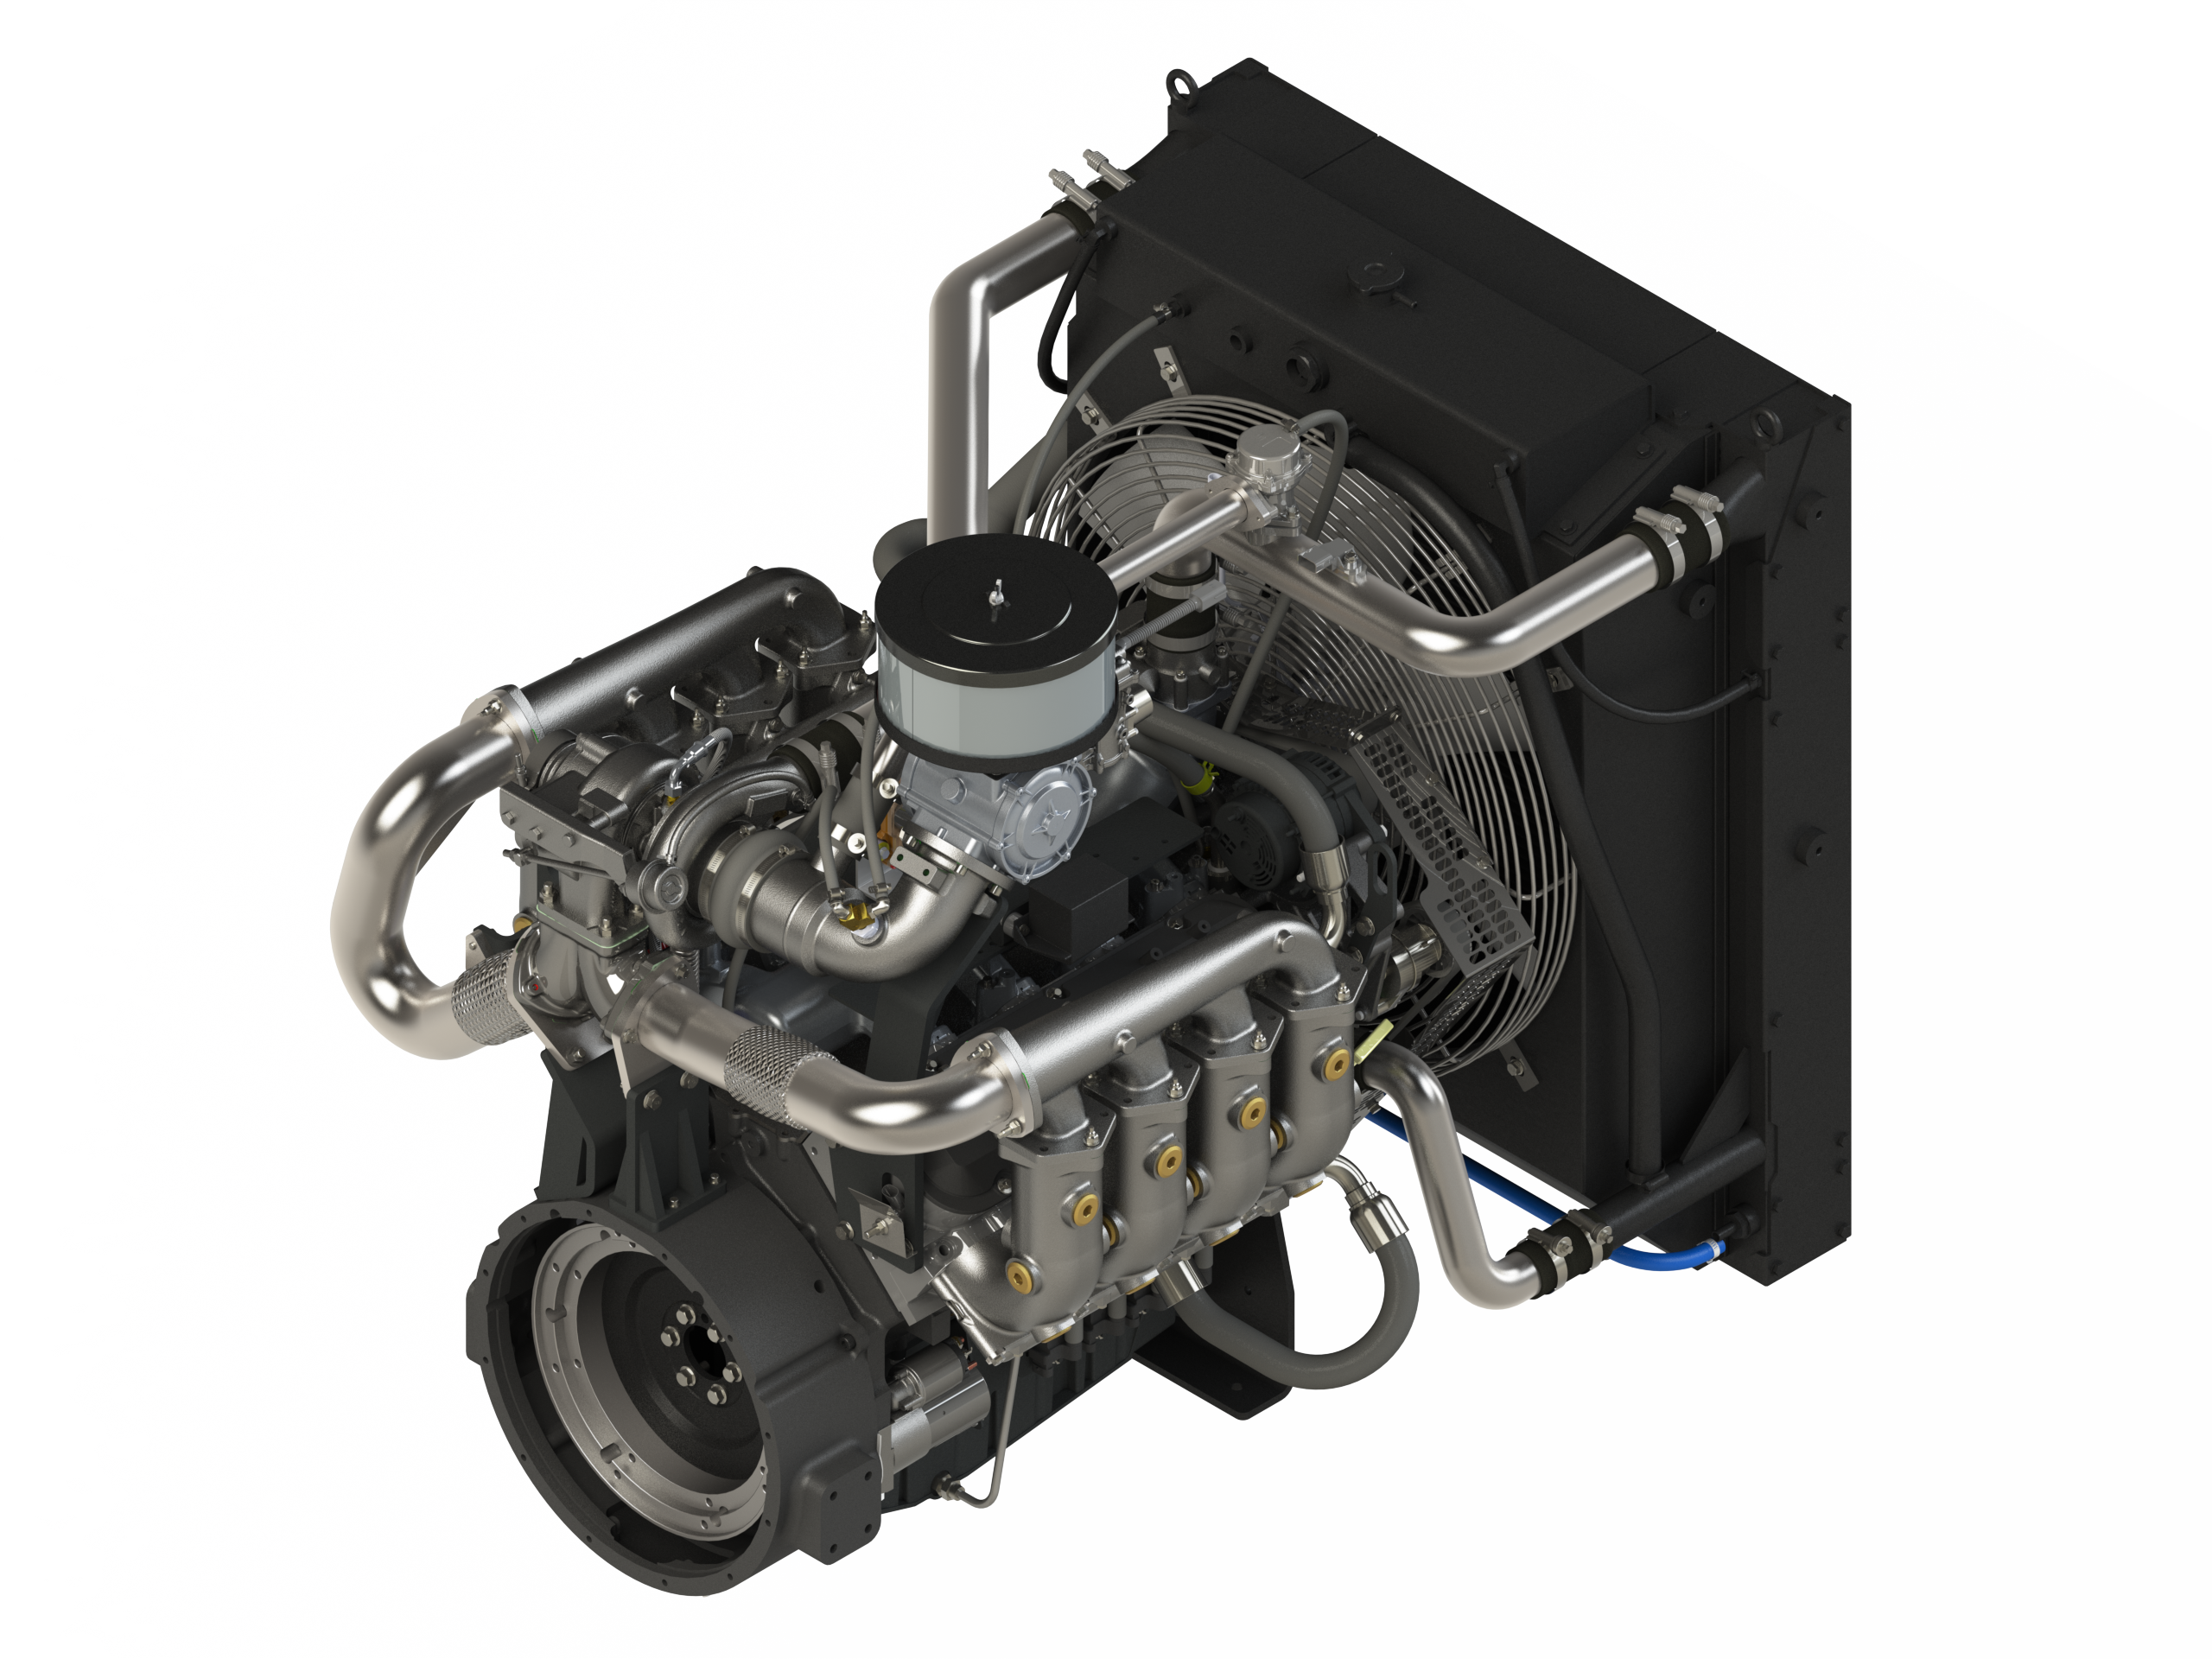 PSI Industrial Engine Spotlighted During ProMat 2019 - Power Solutions  International, Inc.